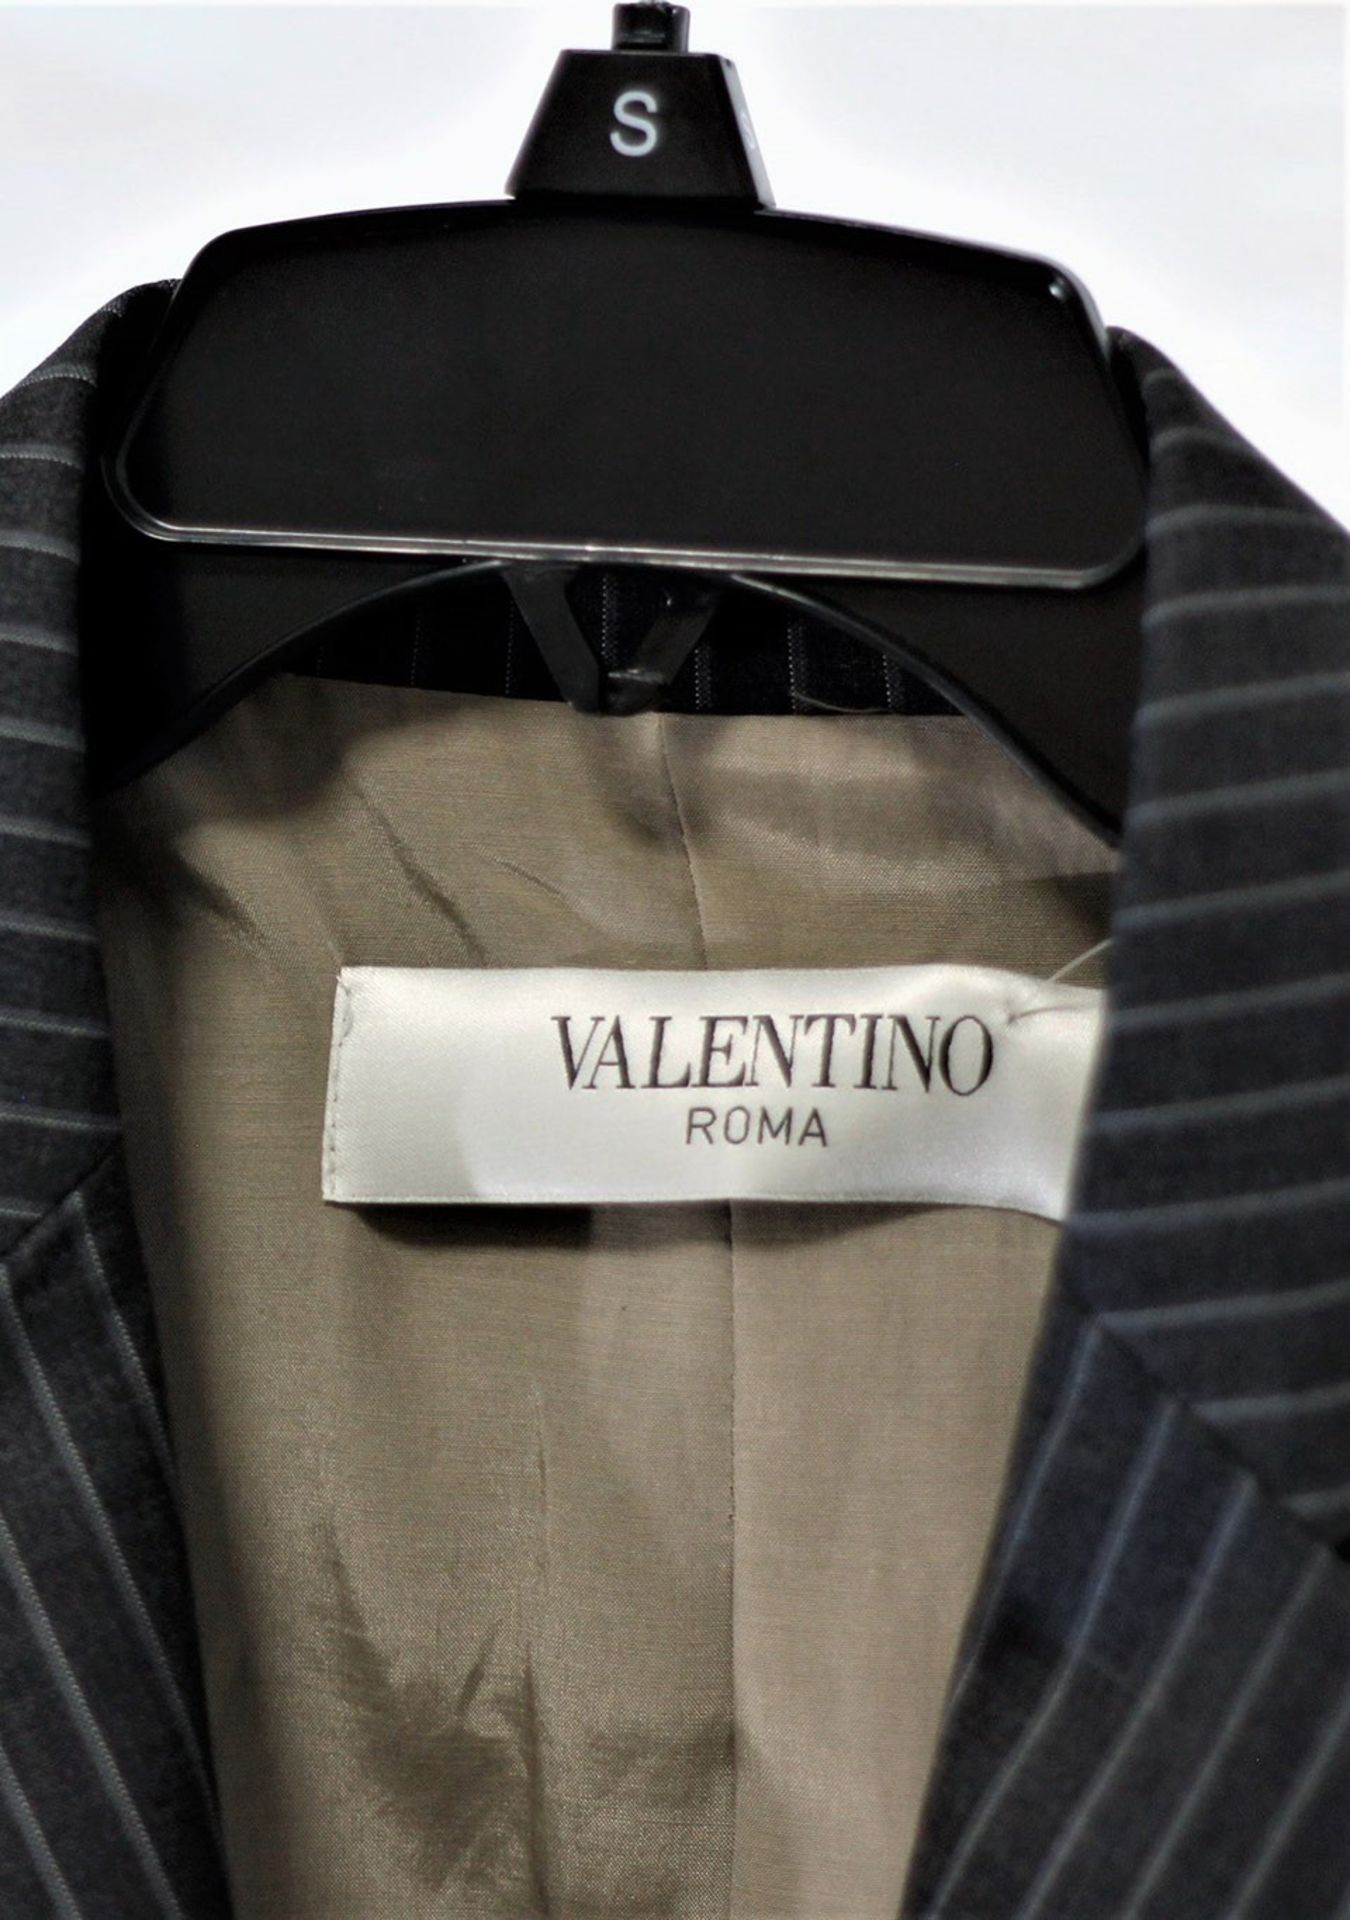 1 x Valentino Roma Grey Stripped Blazer - Size: 18 - Material: Lining 57% Acetate, 43% Cotton. - Image 3 of 7